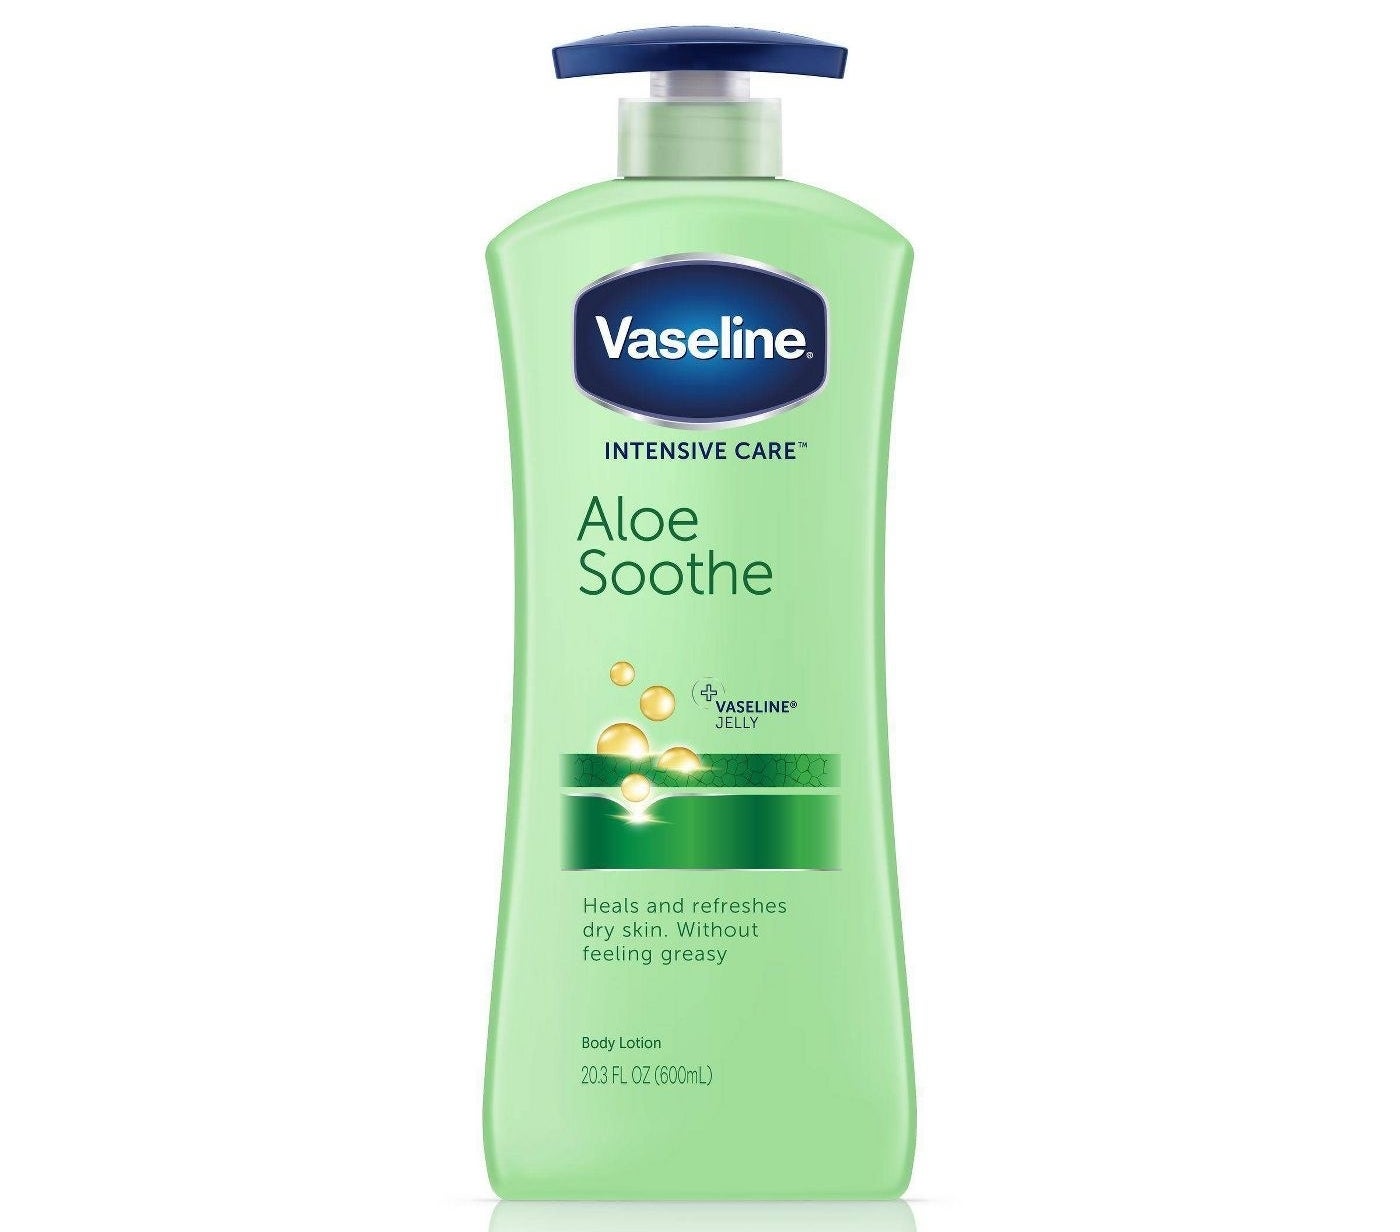 A green pump bottle with blue top of Vaseline aloe soothe